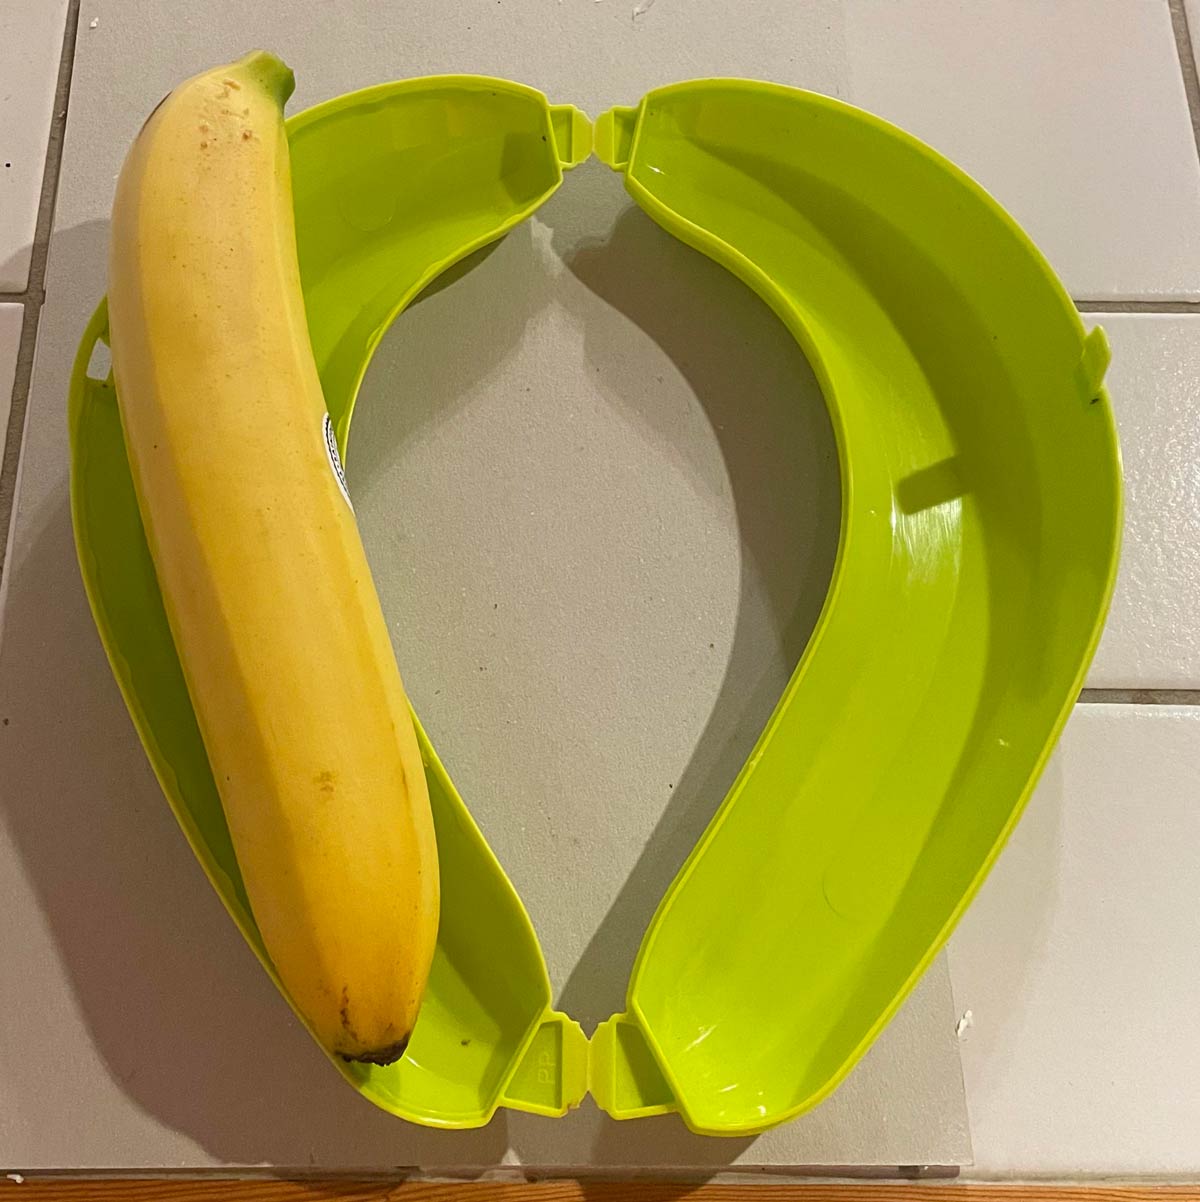 This banana is so straight, it will not fit into my banana box